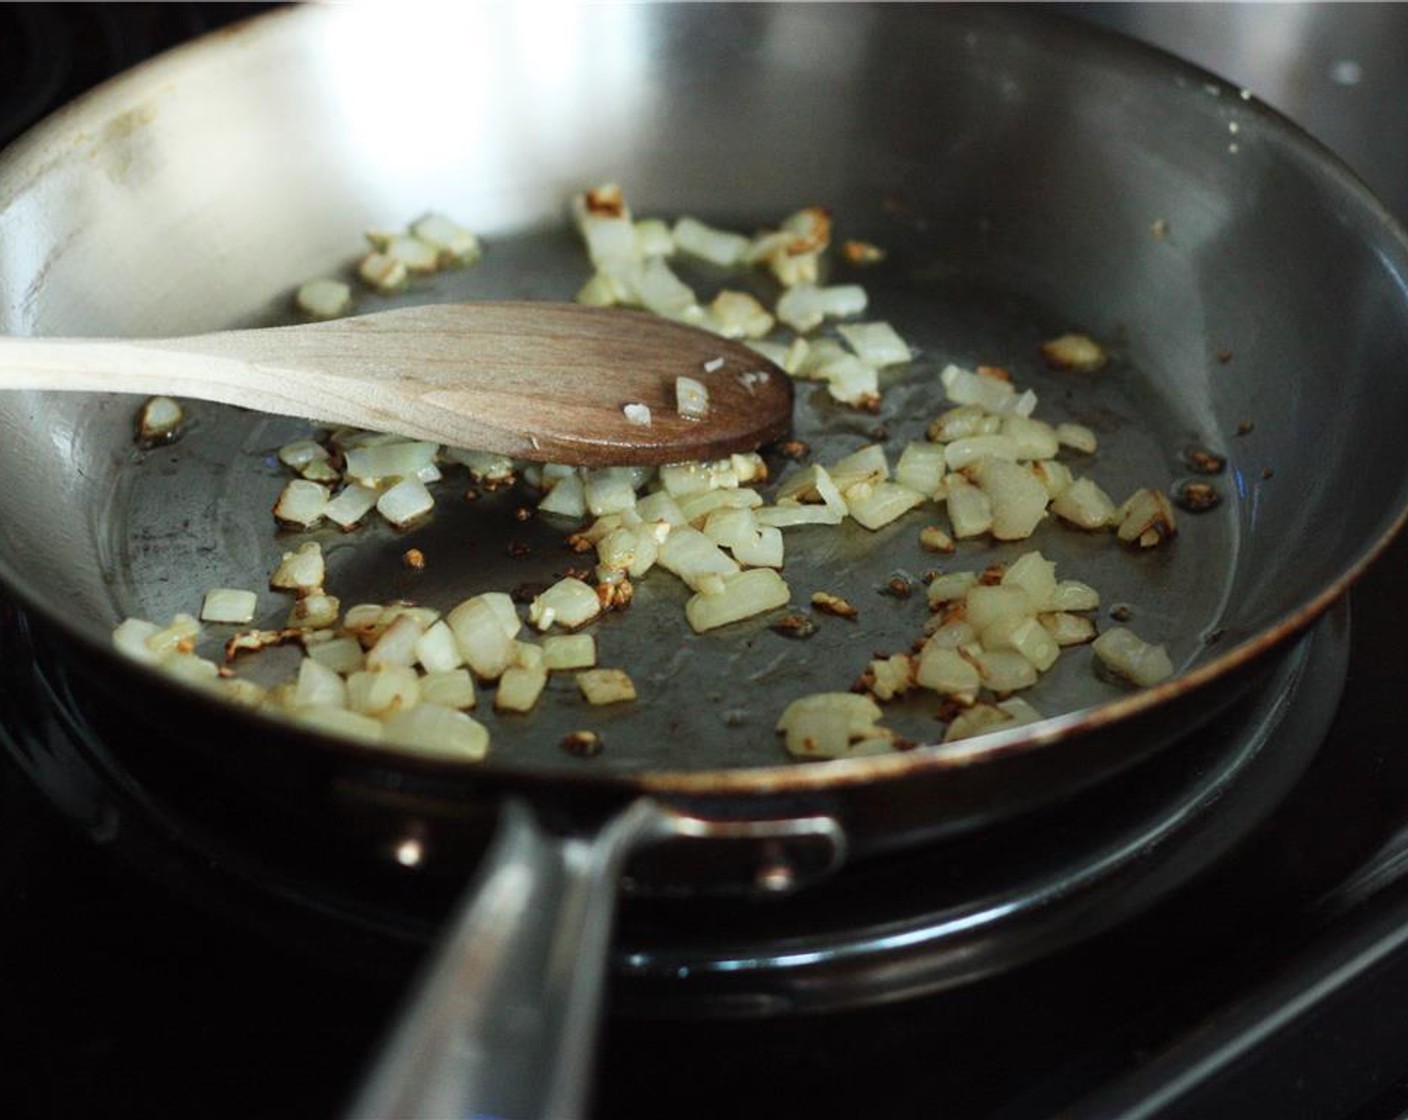 step 1 Heat Olive Oil (1 tsp) in a small saucepan over medium heat. Add Yellow Onion (1/2 cup) and Garlic (2 cloves), and cook until onion is translucent and garlic has just a bit of color.